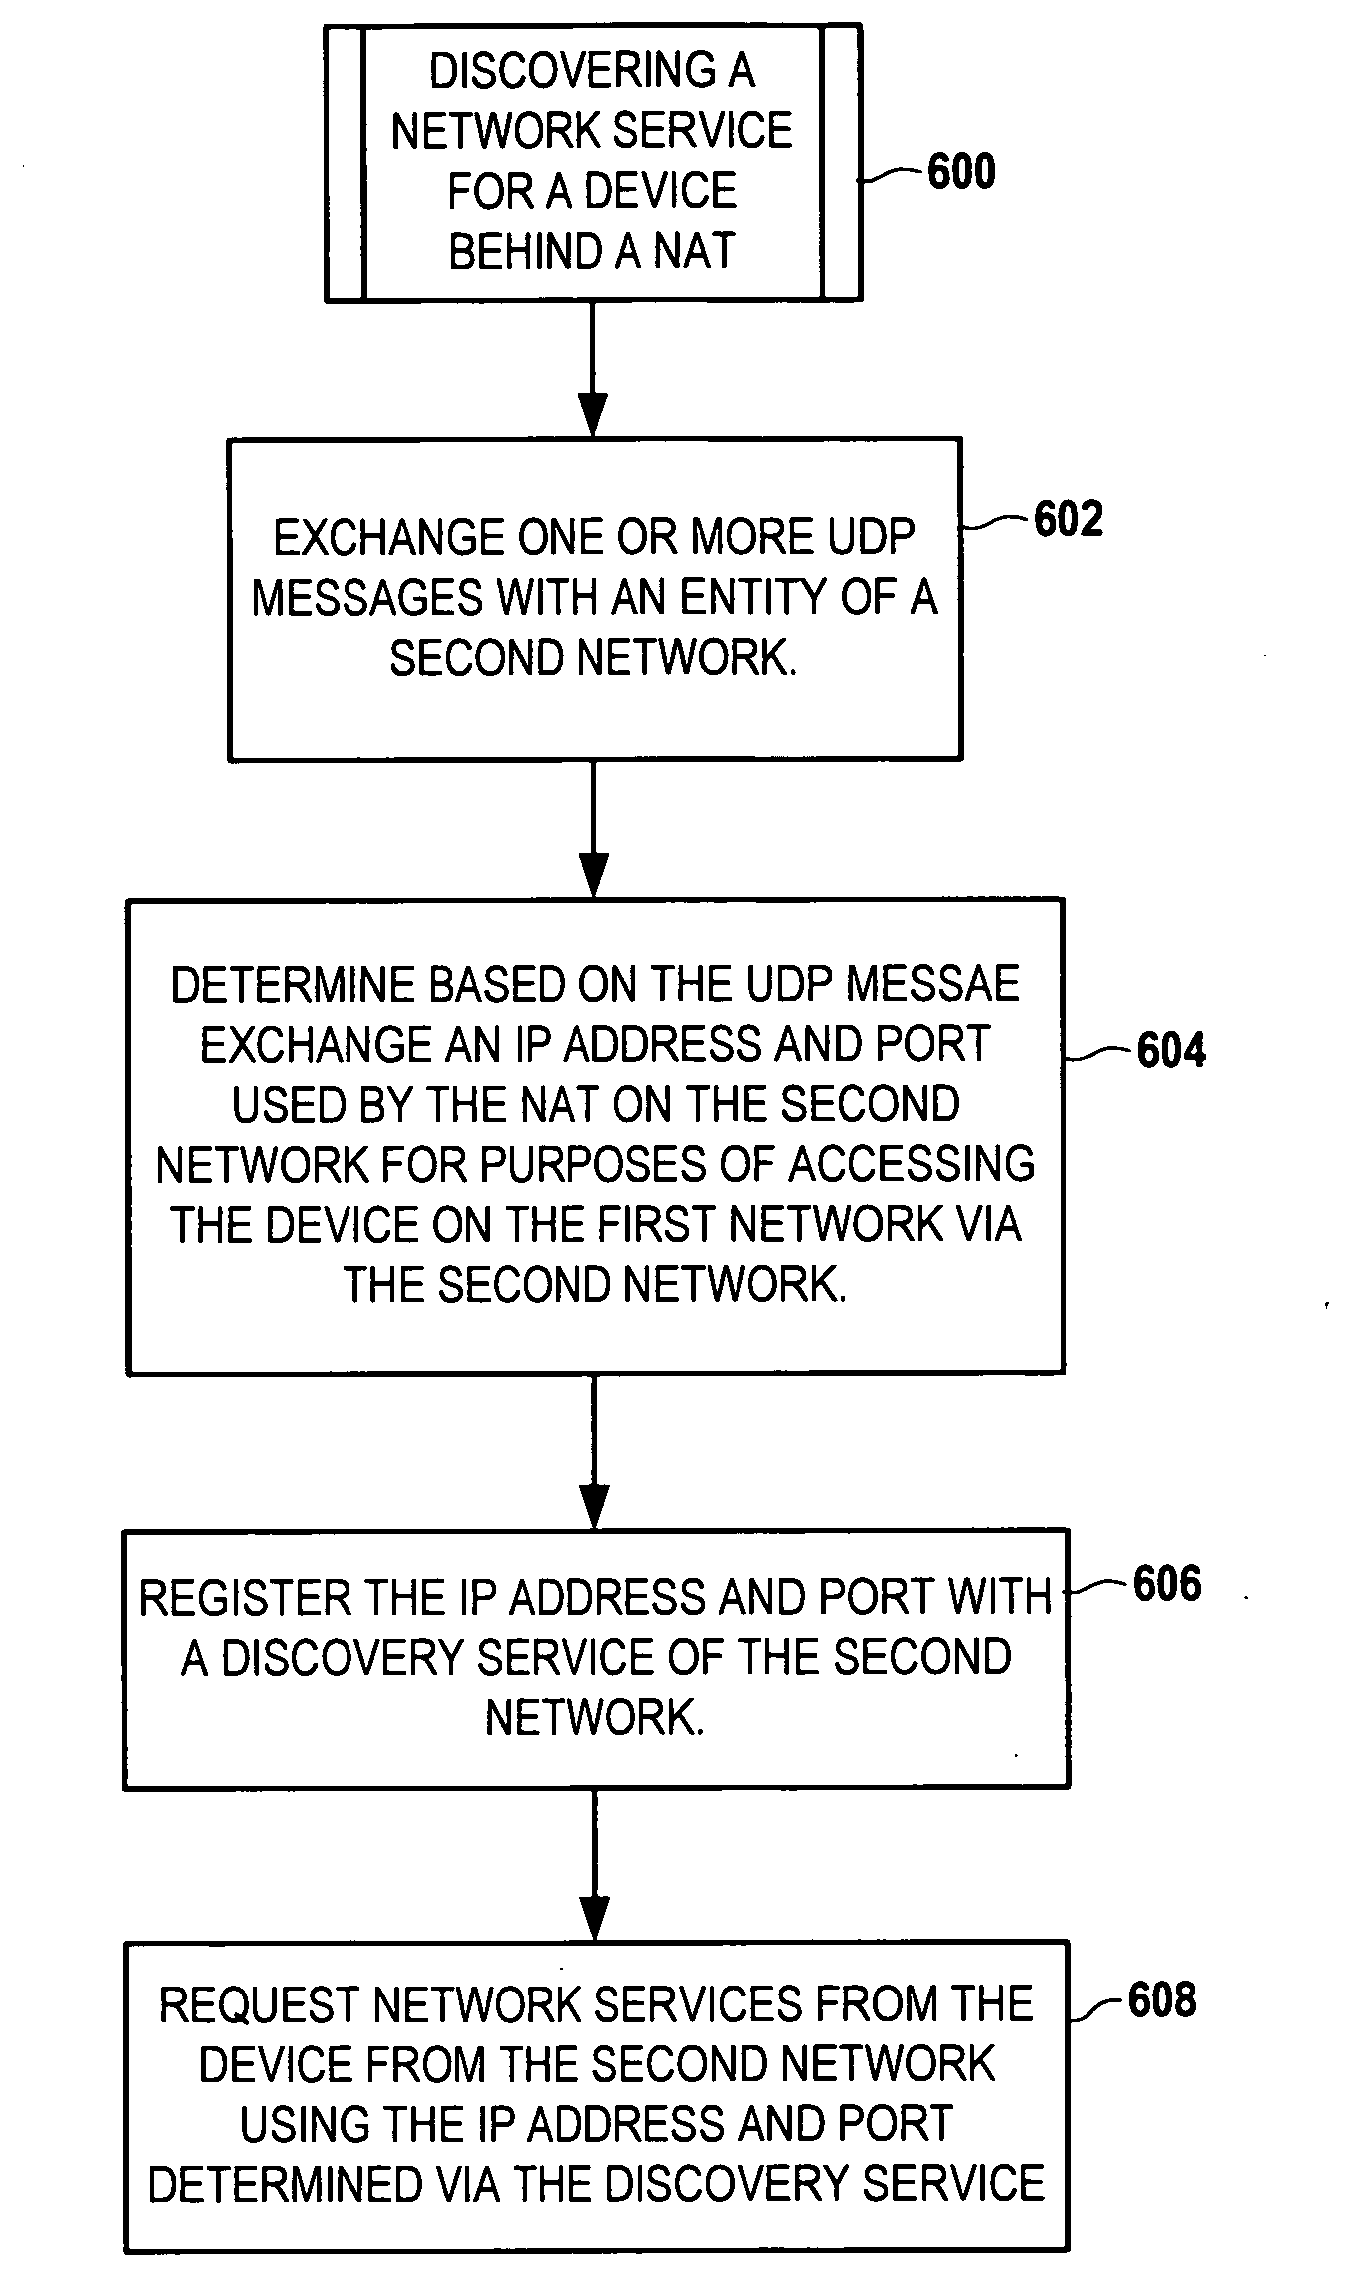 Dynamic discovery of a network service on a mobile device